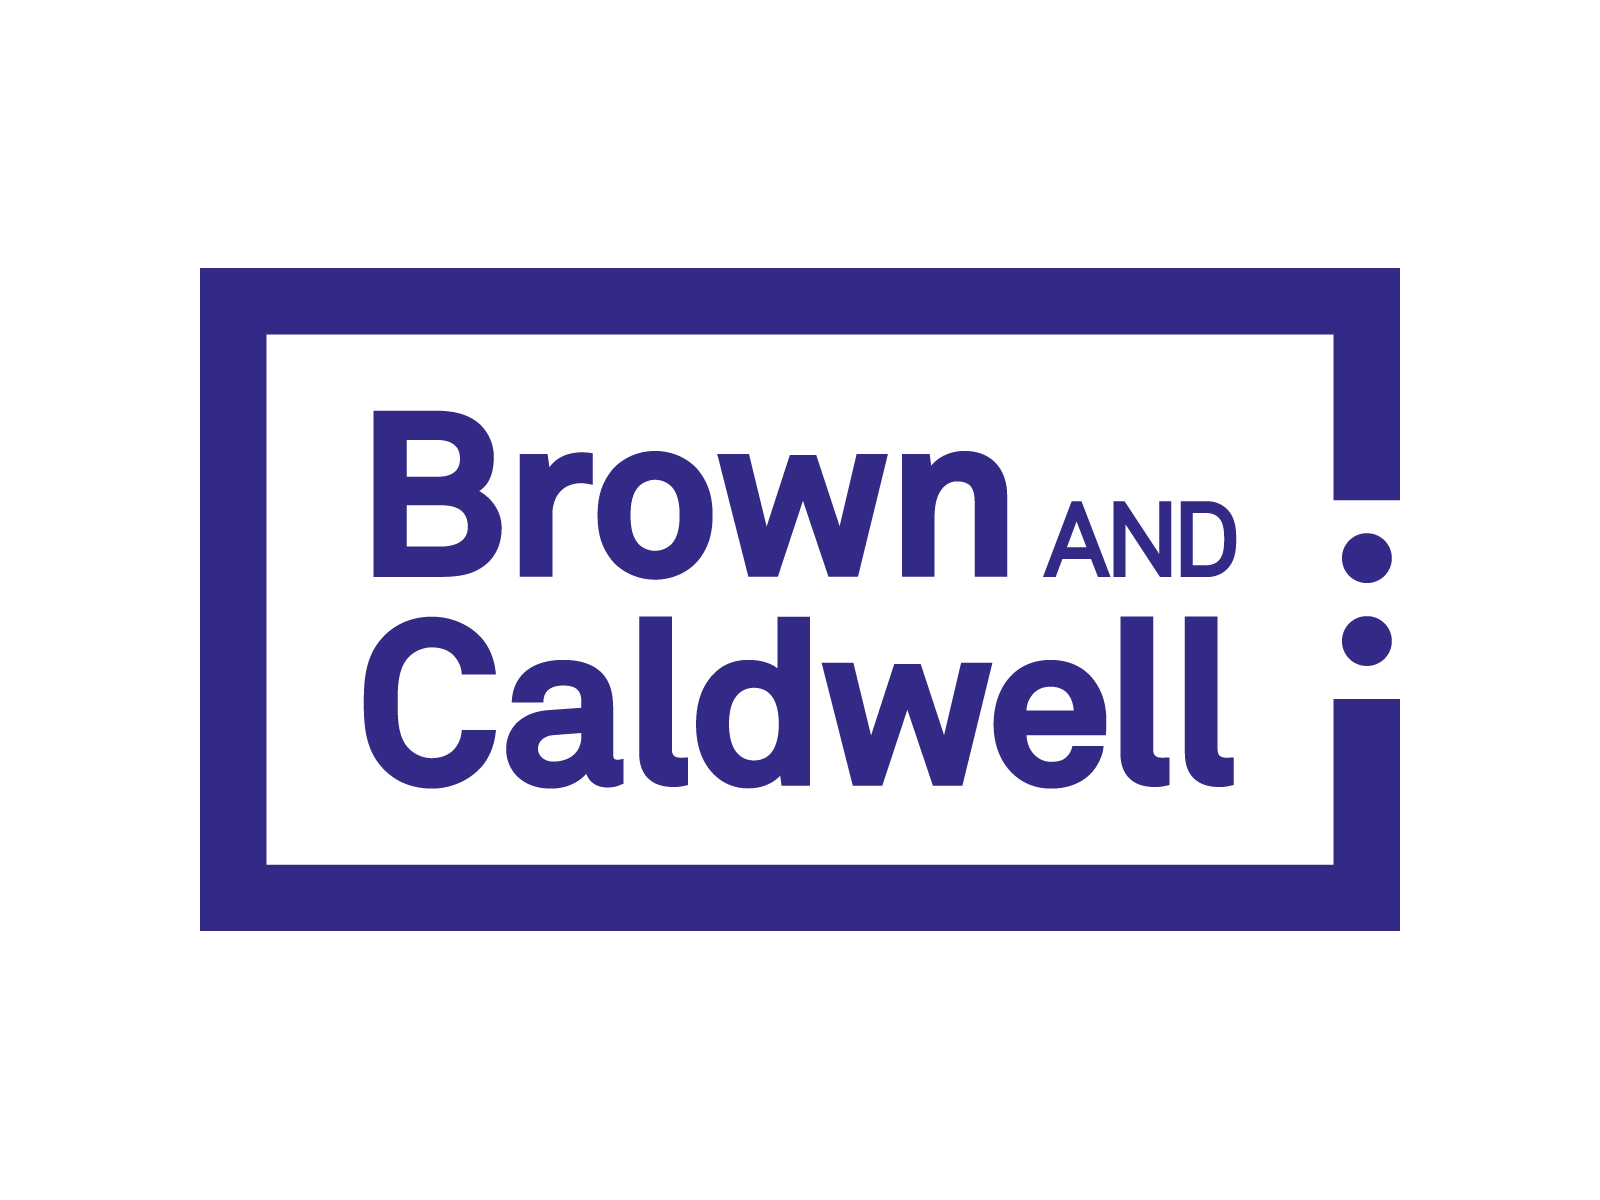 Brown and Caldwell engineers, scientists, consultants and constructors help municipal, private and federal agencies solve complex environmental challenges.